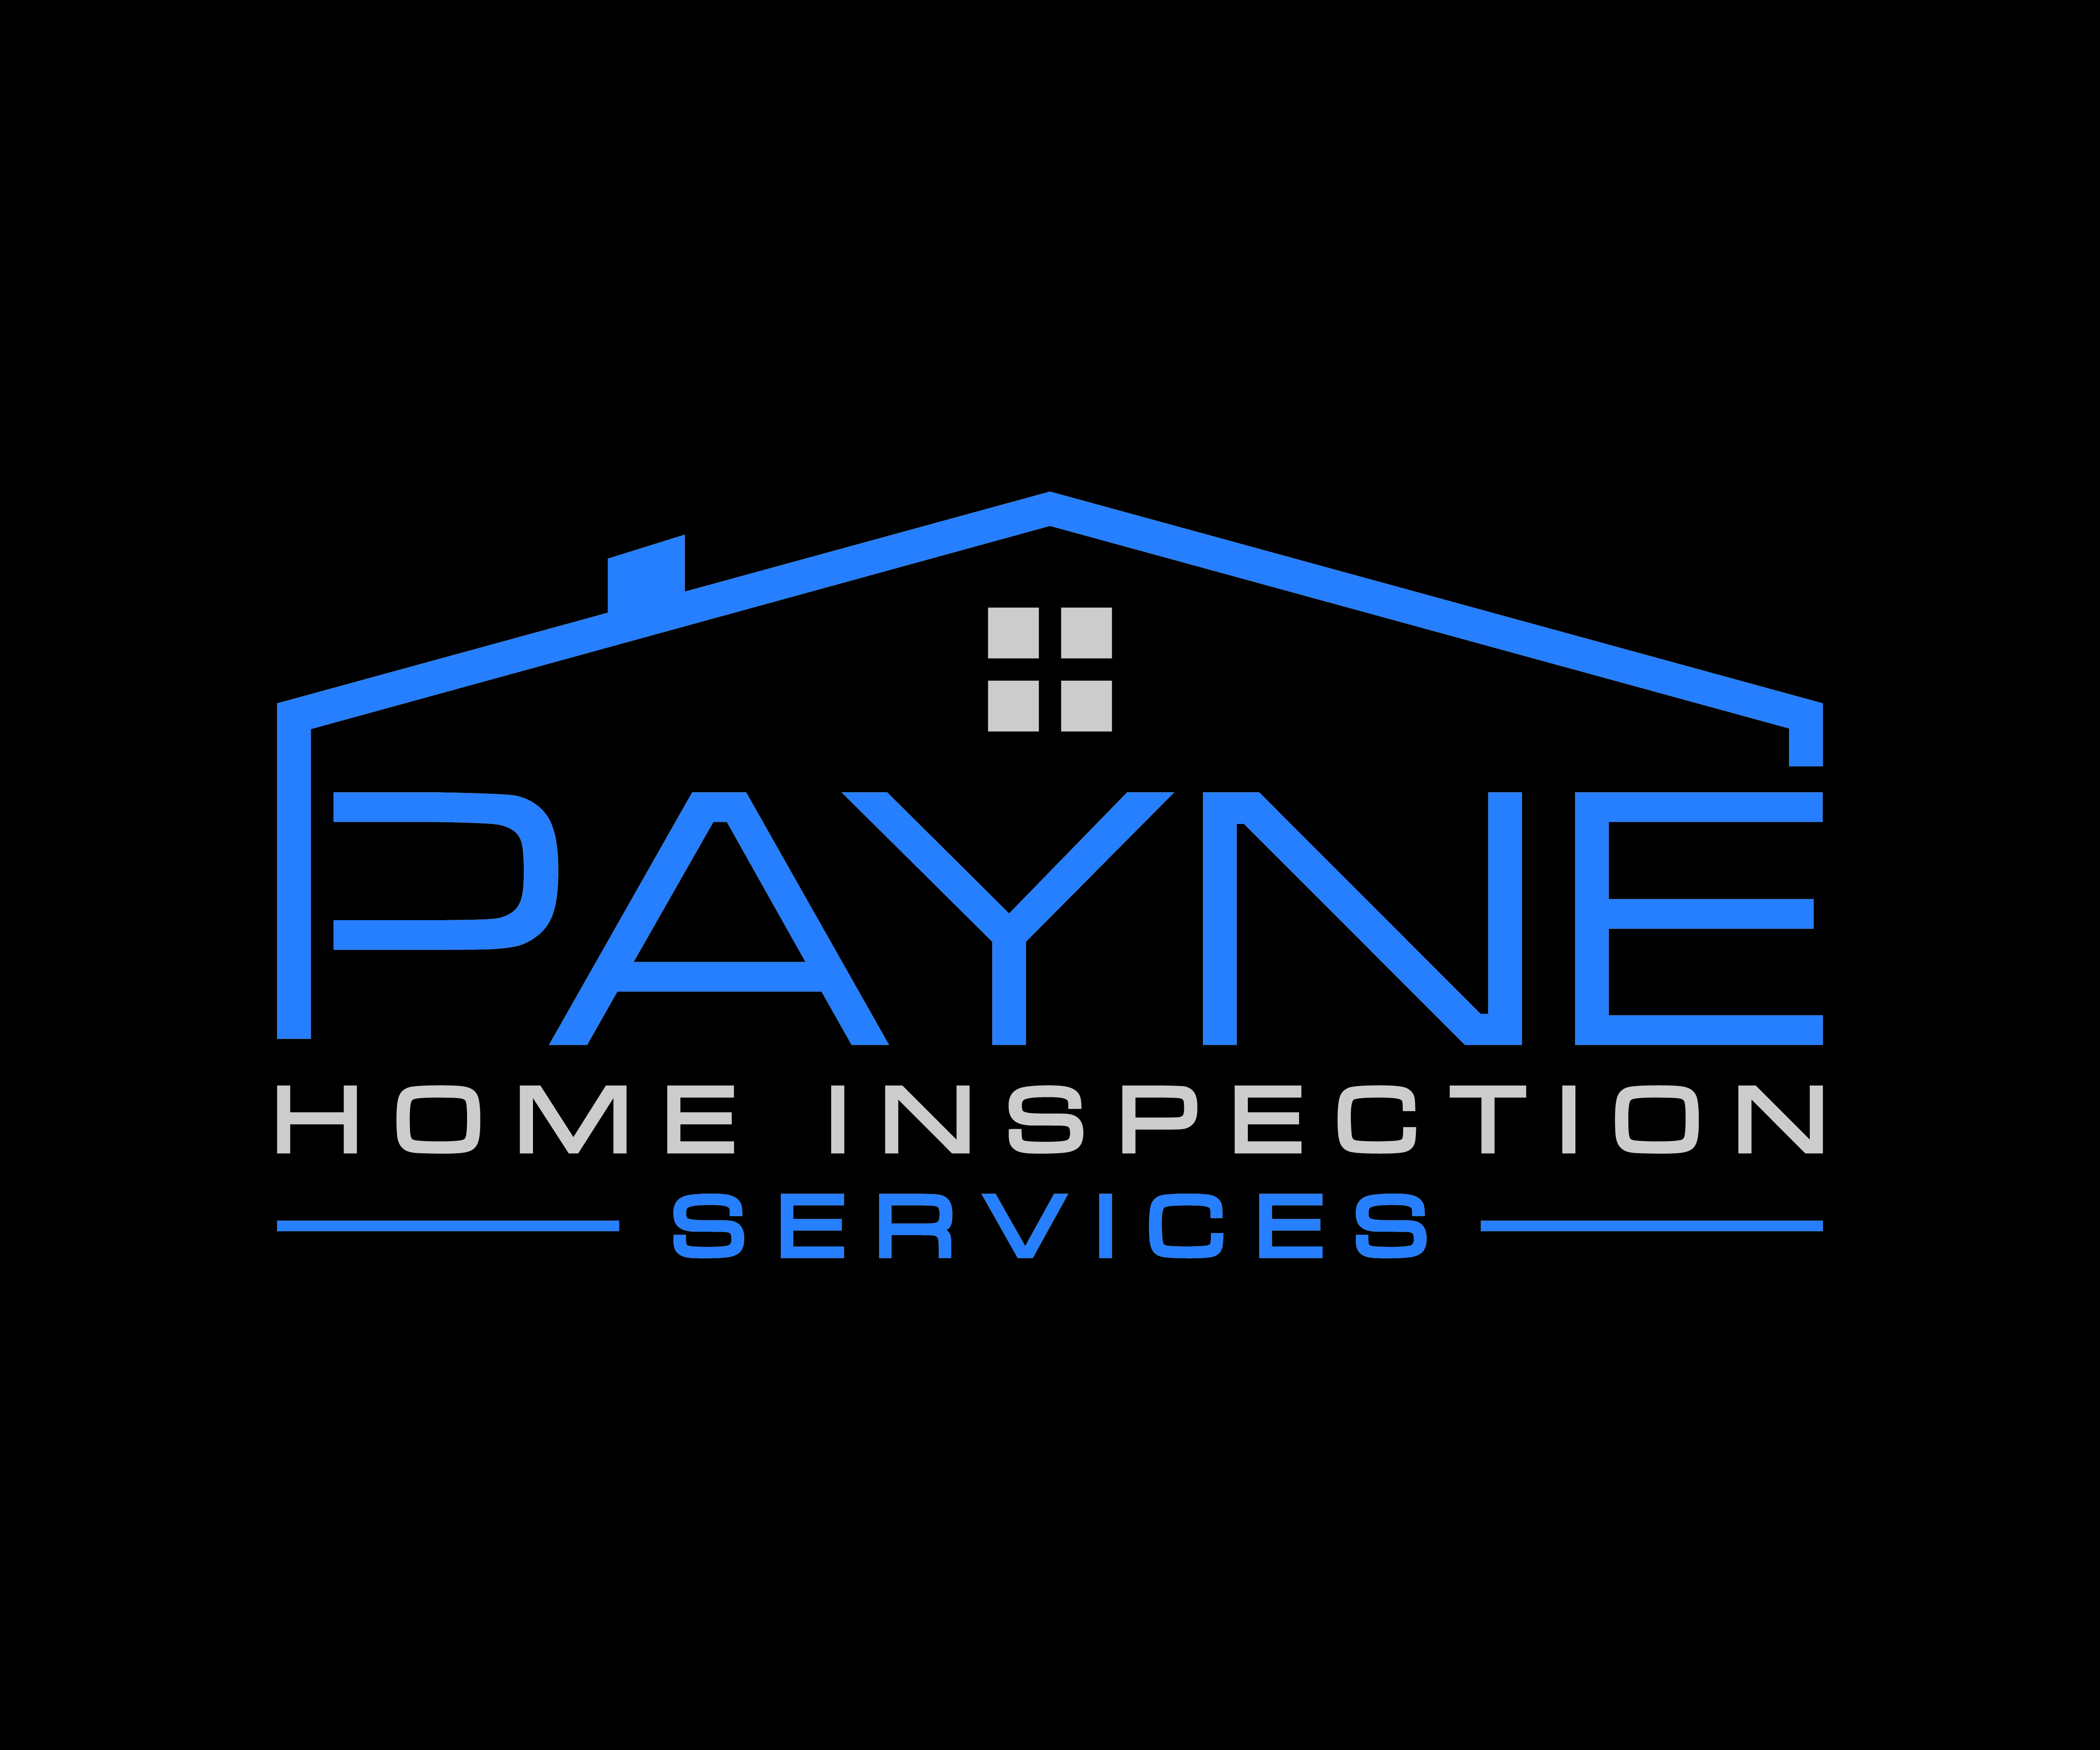 Payne Home Inspection Services Logo